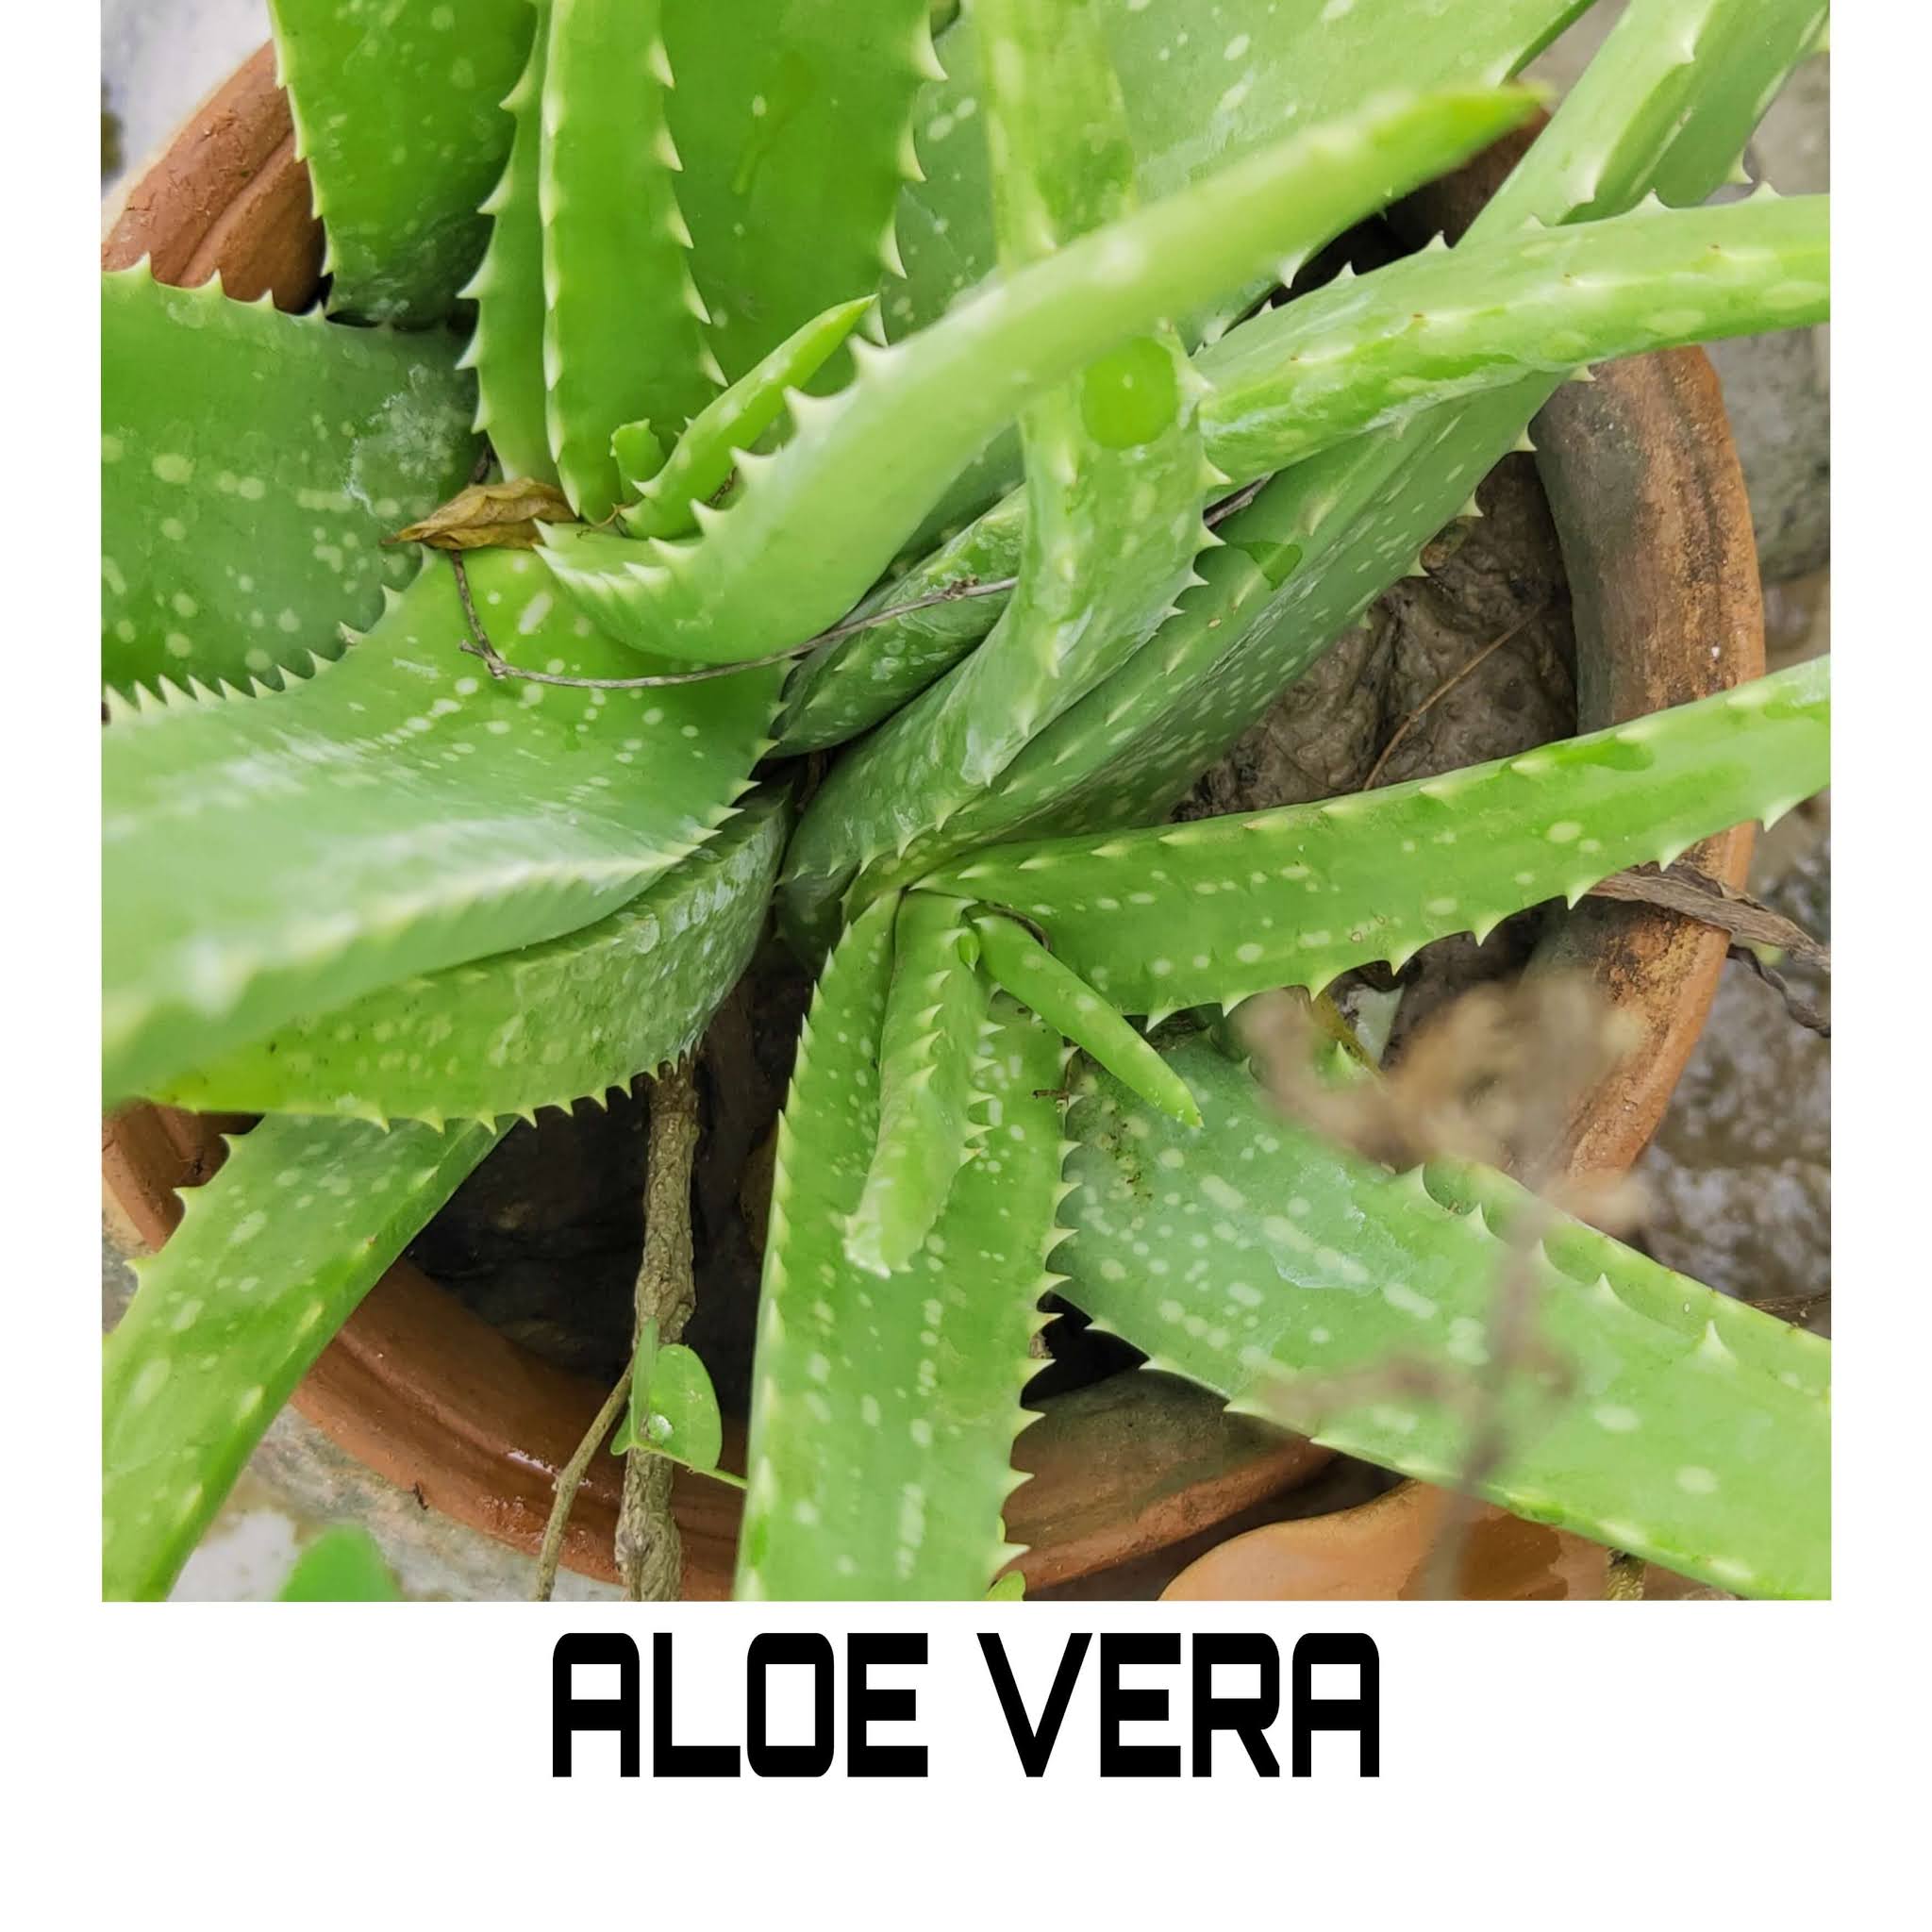 Aloe Vera is one of the top 5 Medicinal Plants every household should have